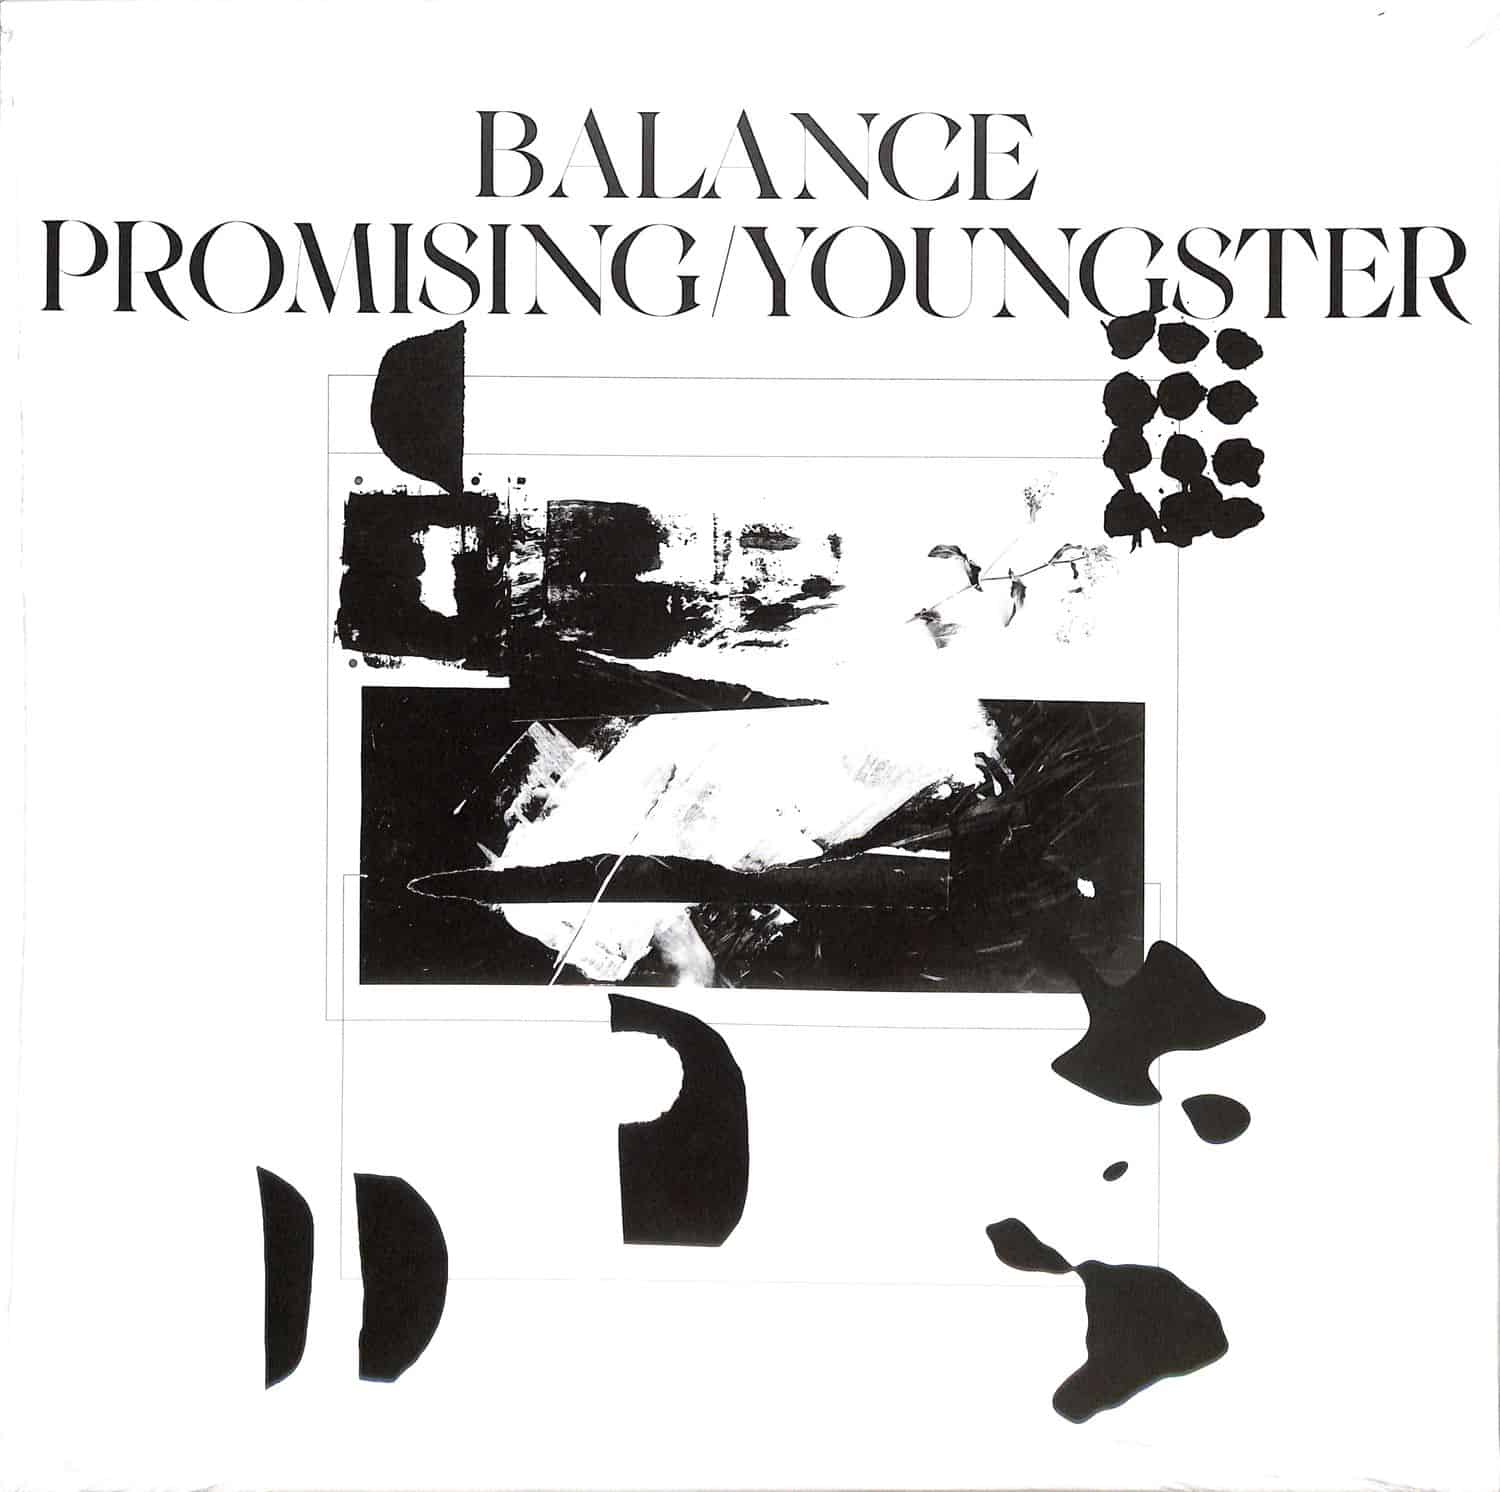 Promising/Youngster - BALANCE EP